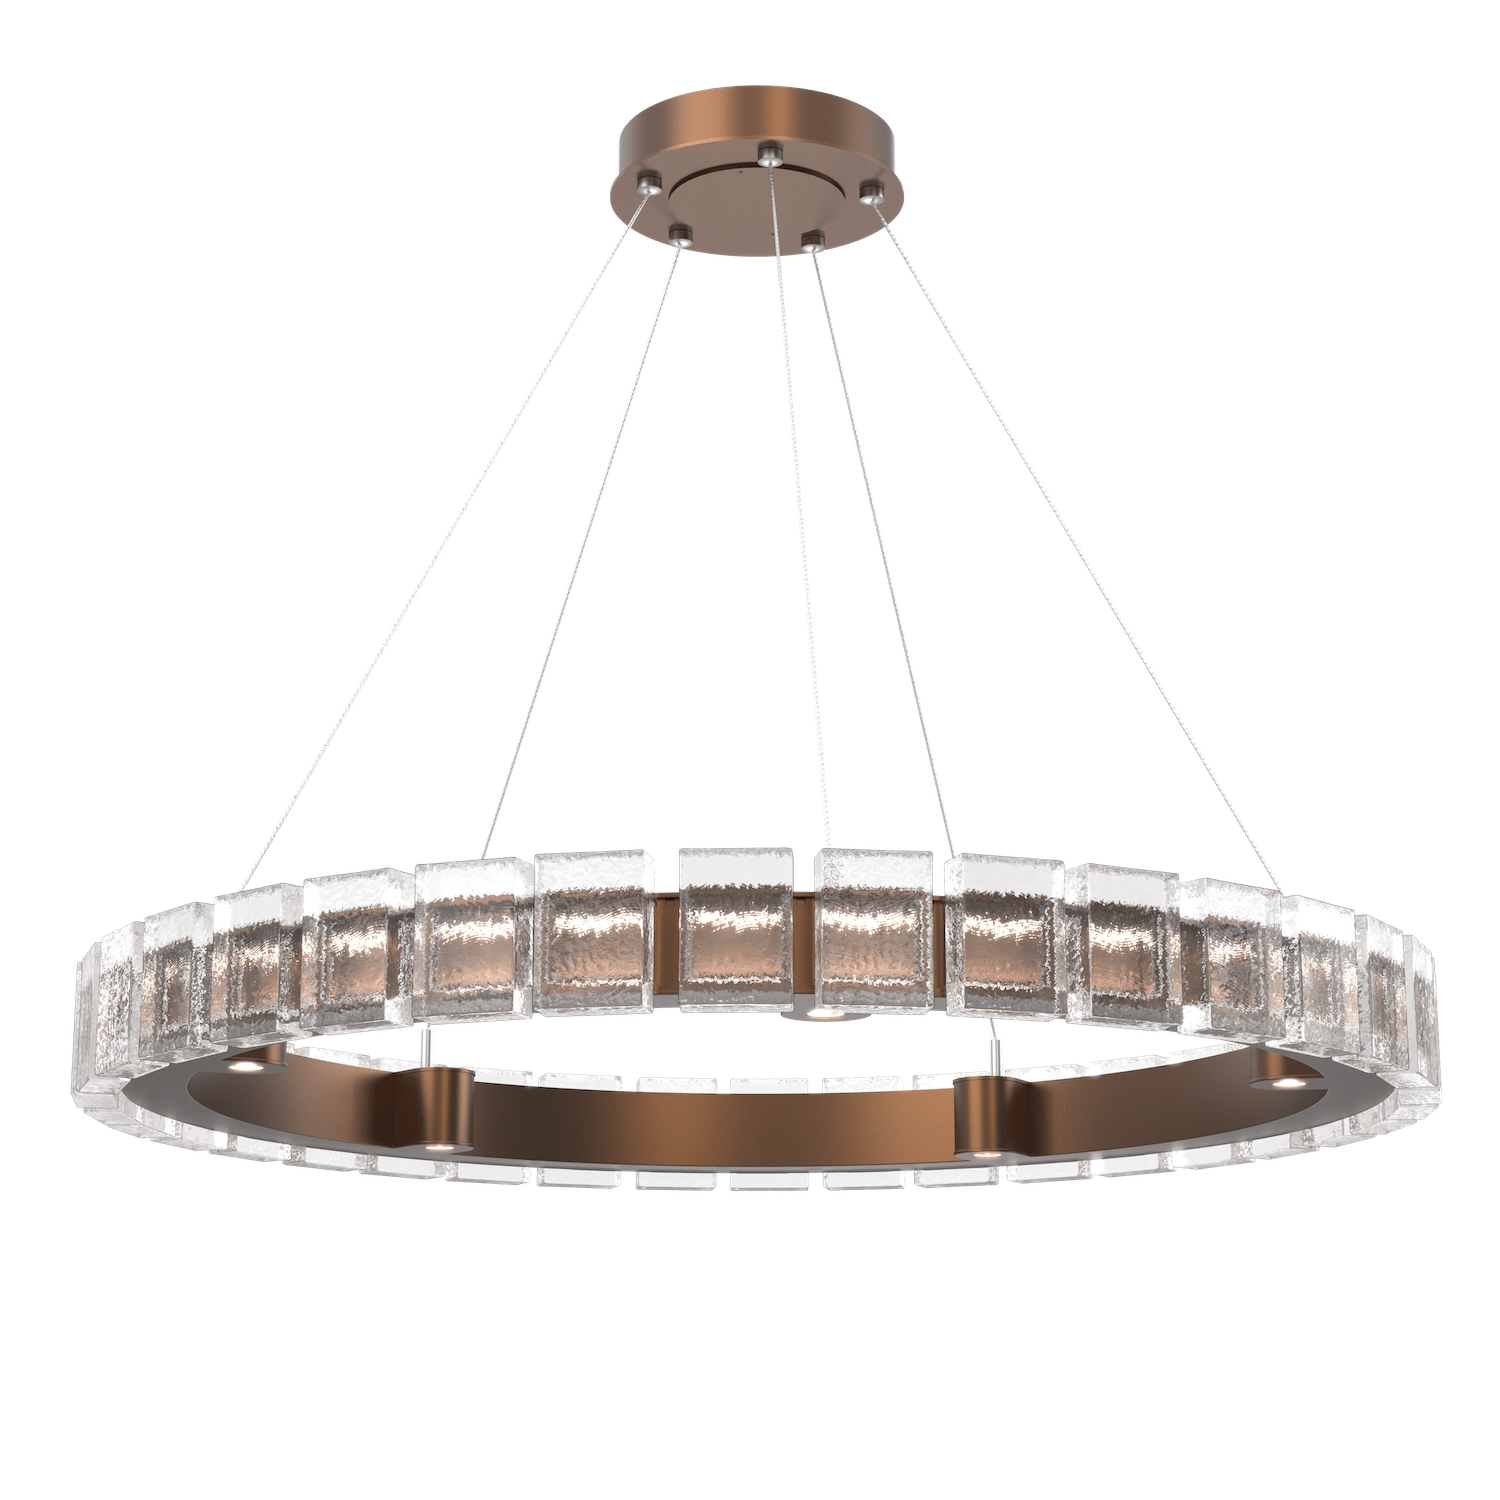 CHB0087-38-BB-TP-Hammerton-Studio-Tessera-38-inch-ring-chandelier-with-burnished-bronze-finish-and-clear-pave-cast-glass-shade-and-LED-lamping